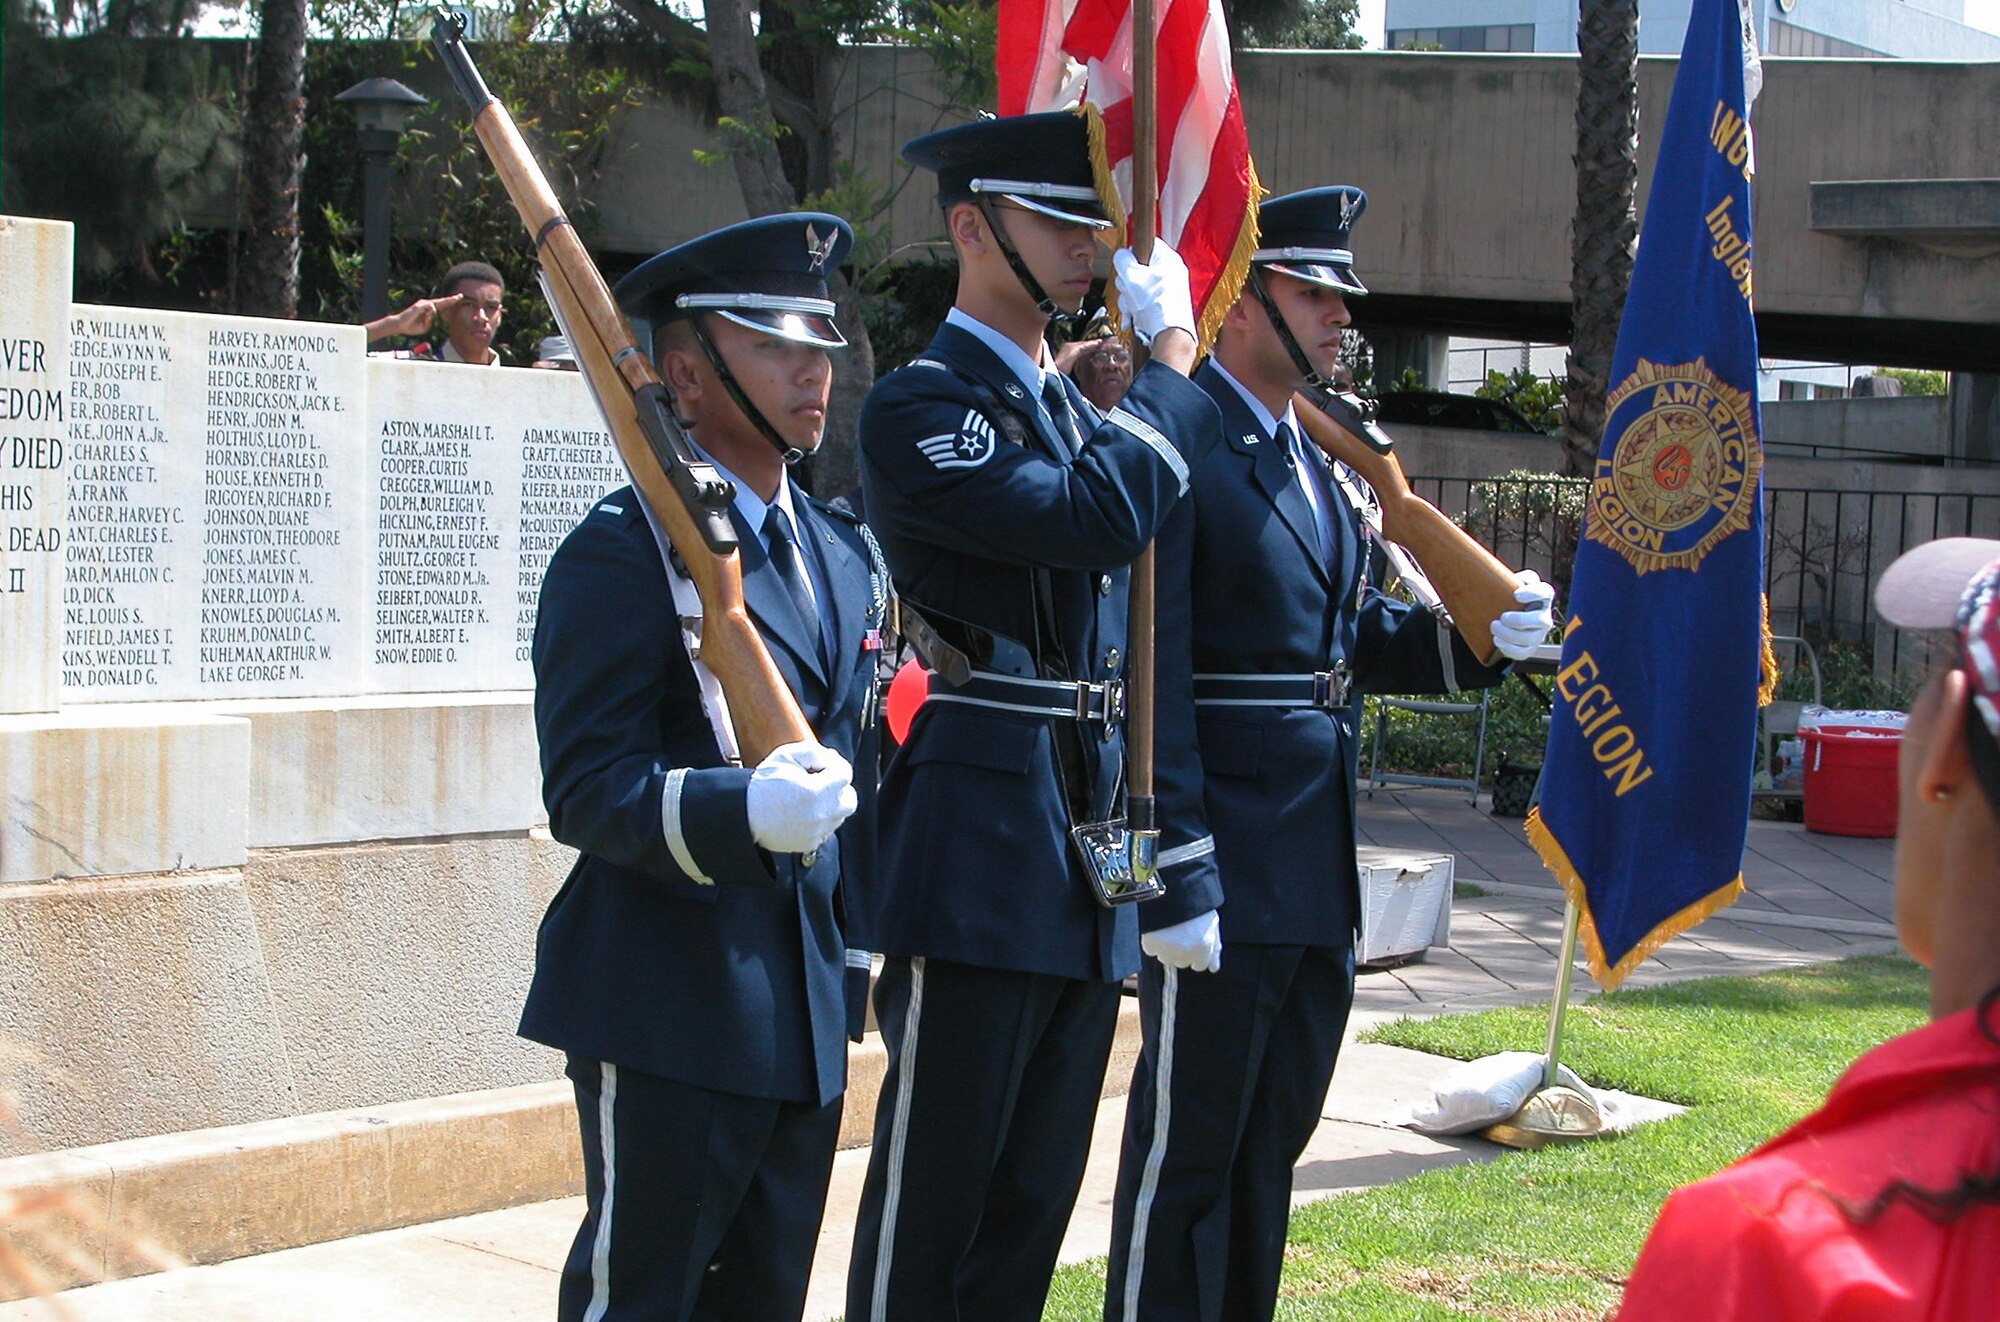 The Los Angeles Air Force Base Honor Guard posted the colors at Inglewood’s Memorial Day observance, May 26. (Photo by LaGina Jackson)